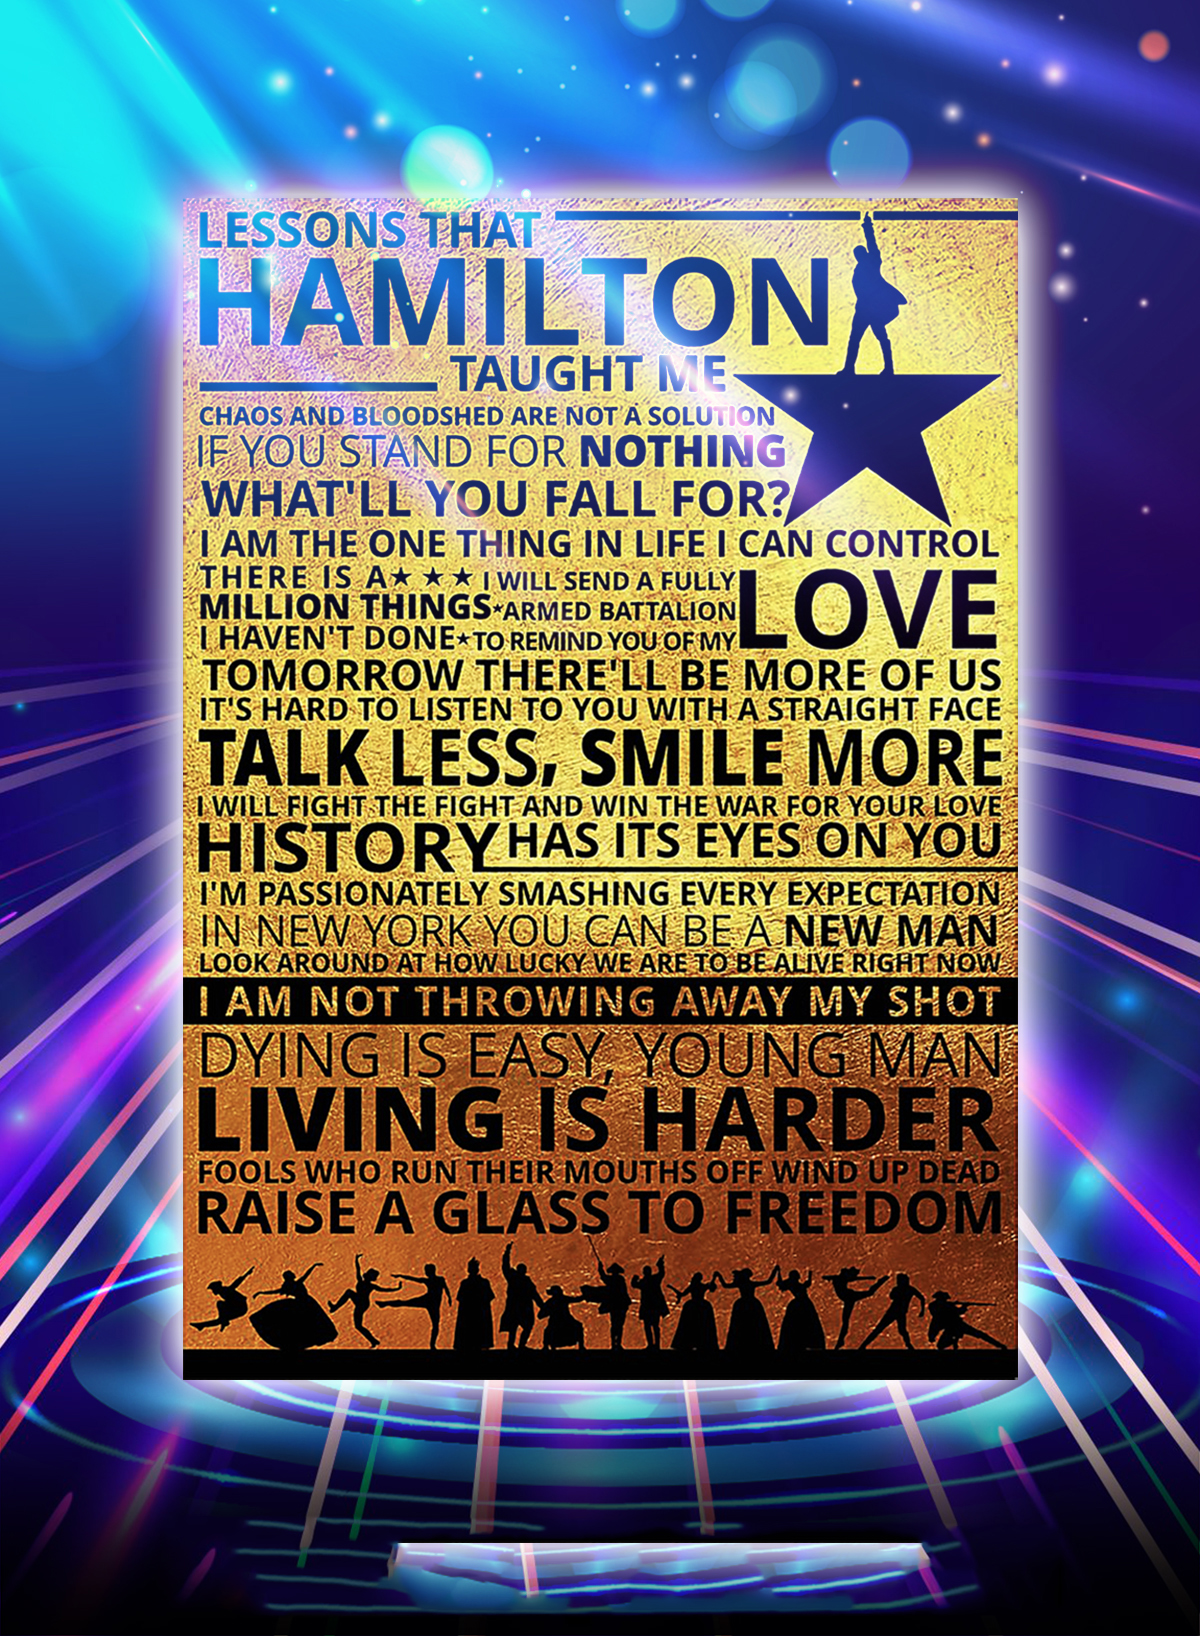 Lessons hamilton taught me poster - A1